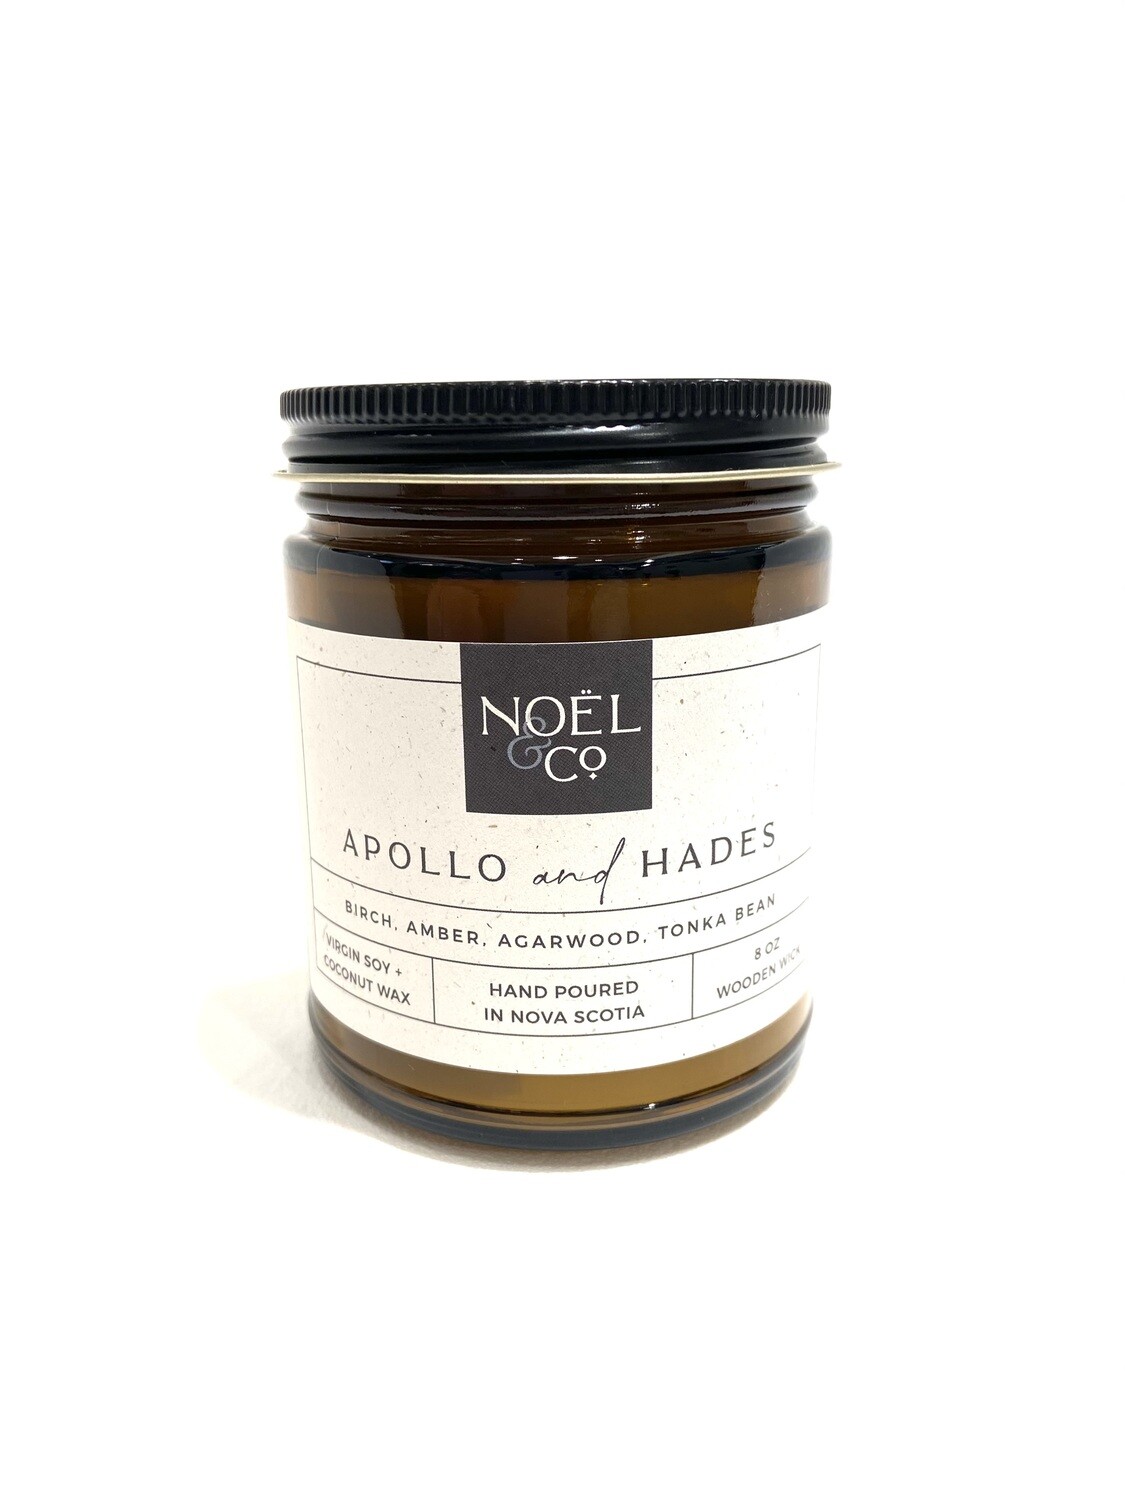 Apollo and Hades Candle- Noel & Co.